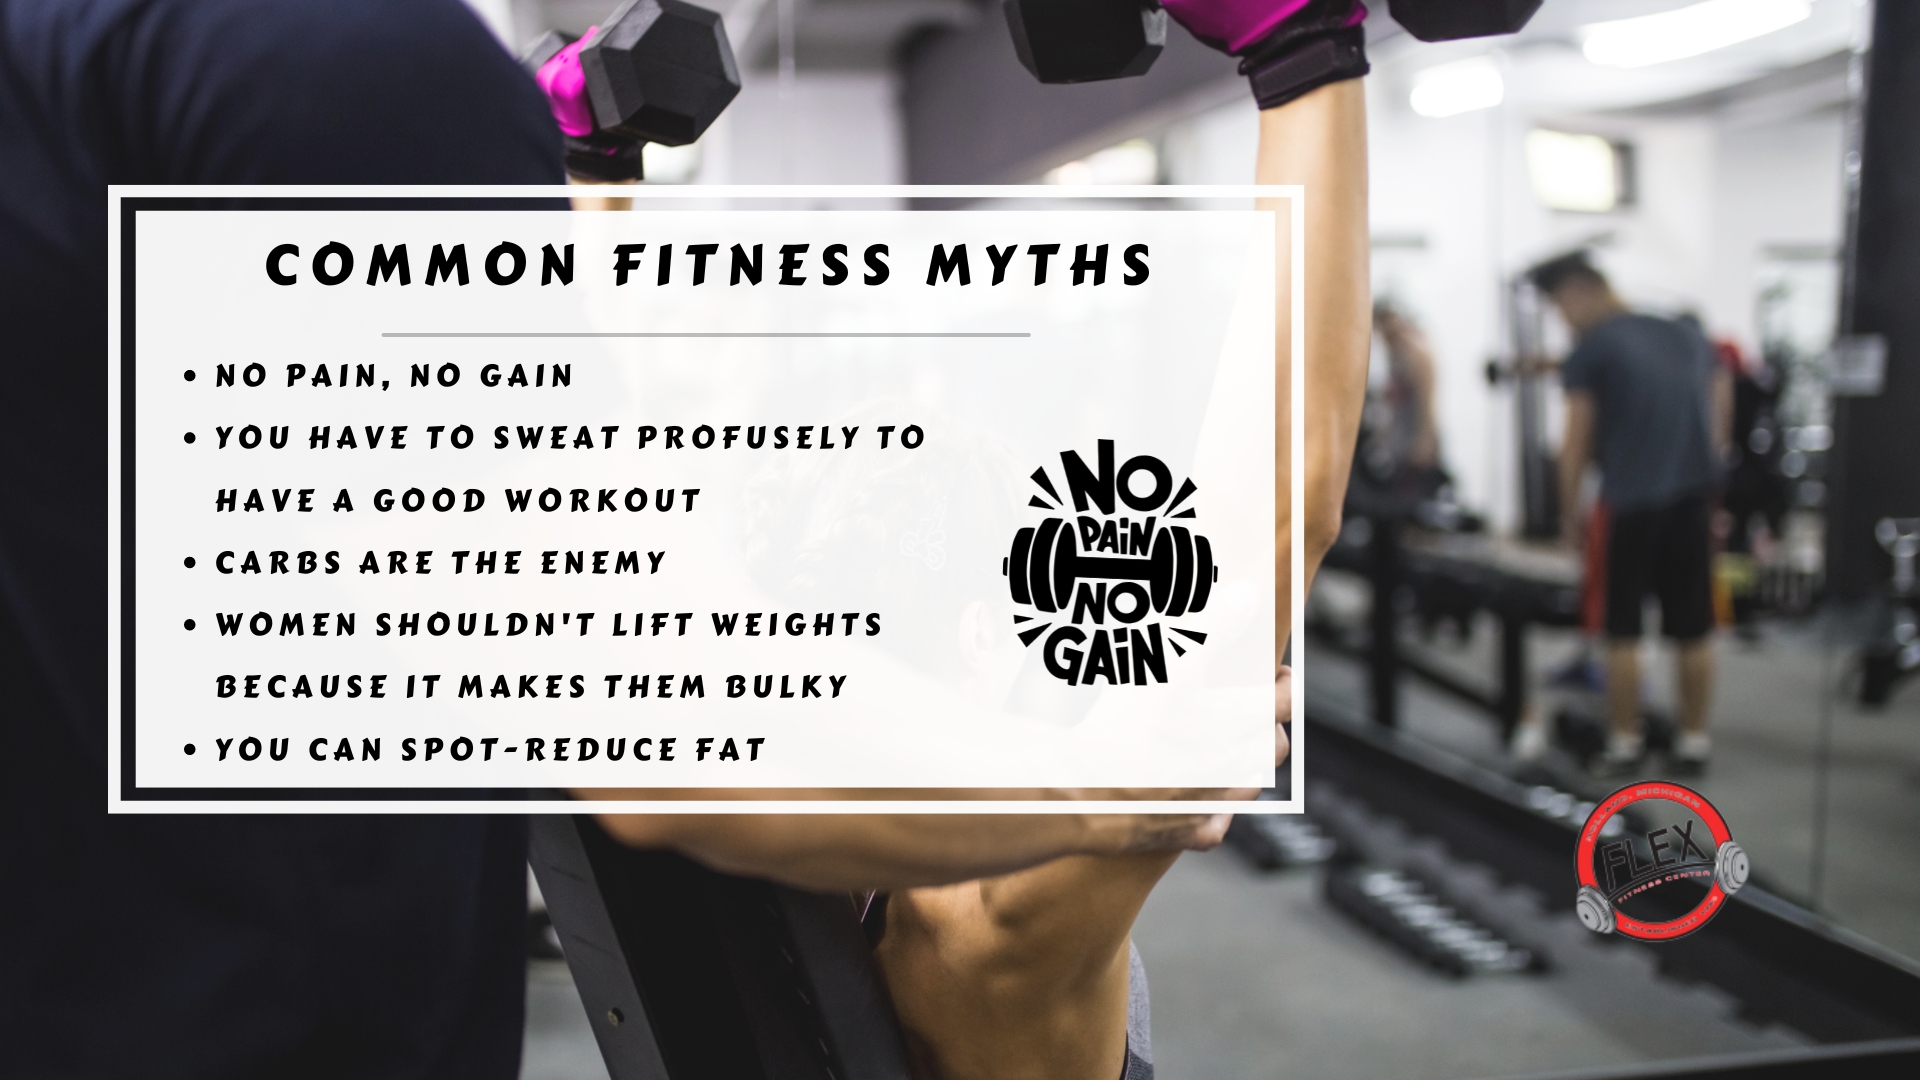 Infographic image of common fitness myths